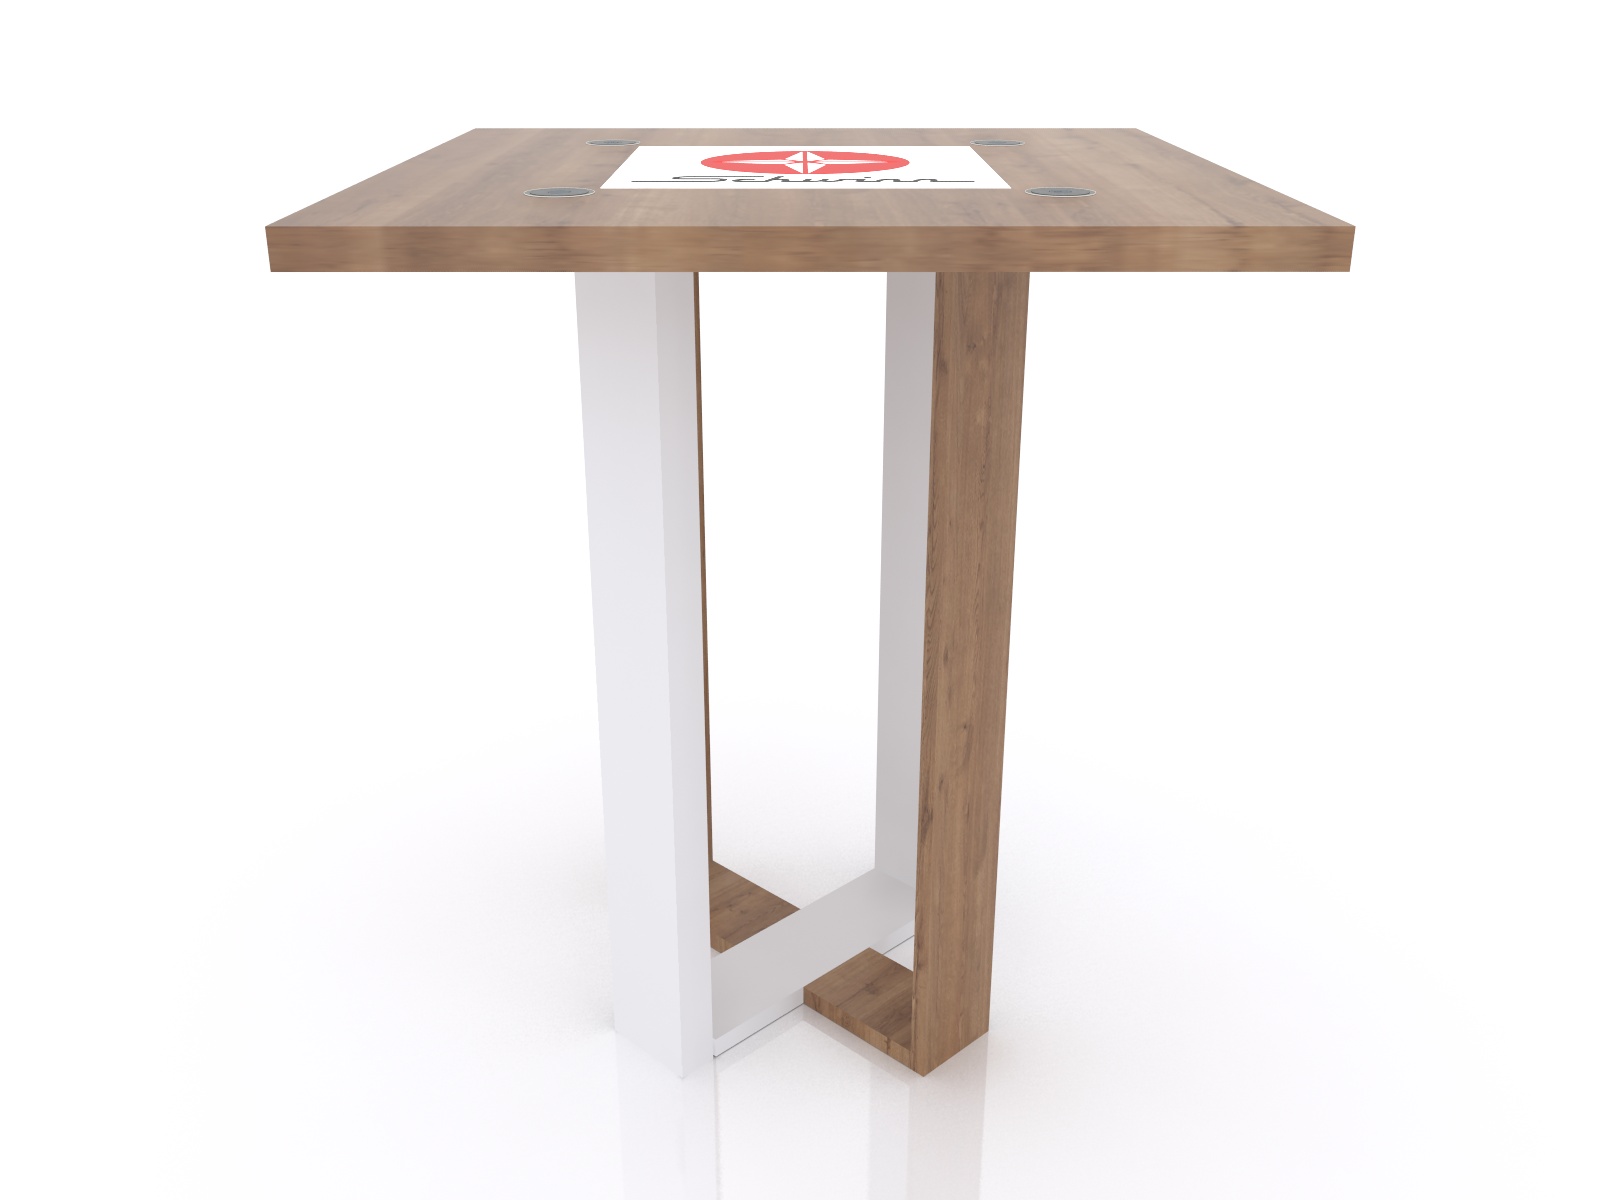 MOD-1483 Wireless Trade Show and Event Charging Bistro Table -- Image 2